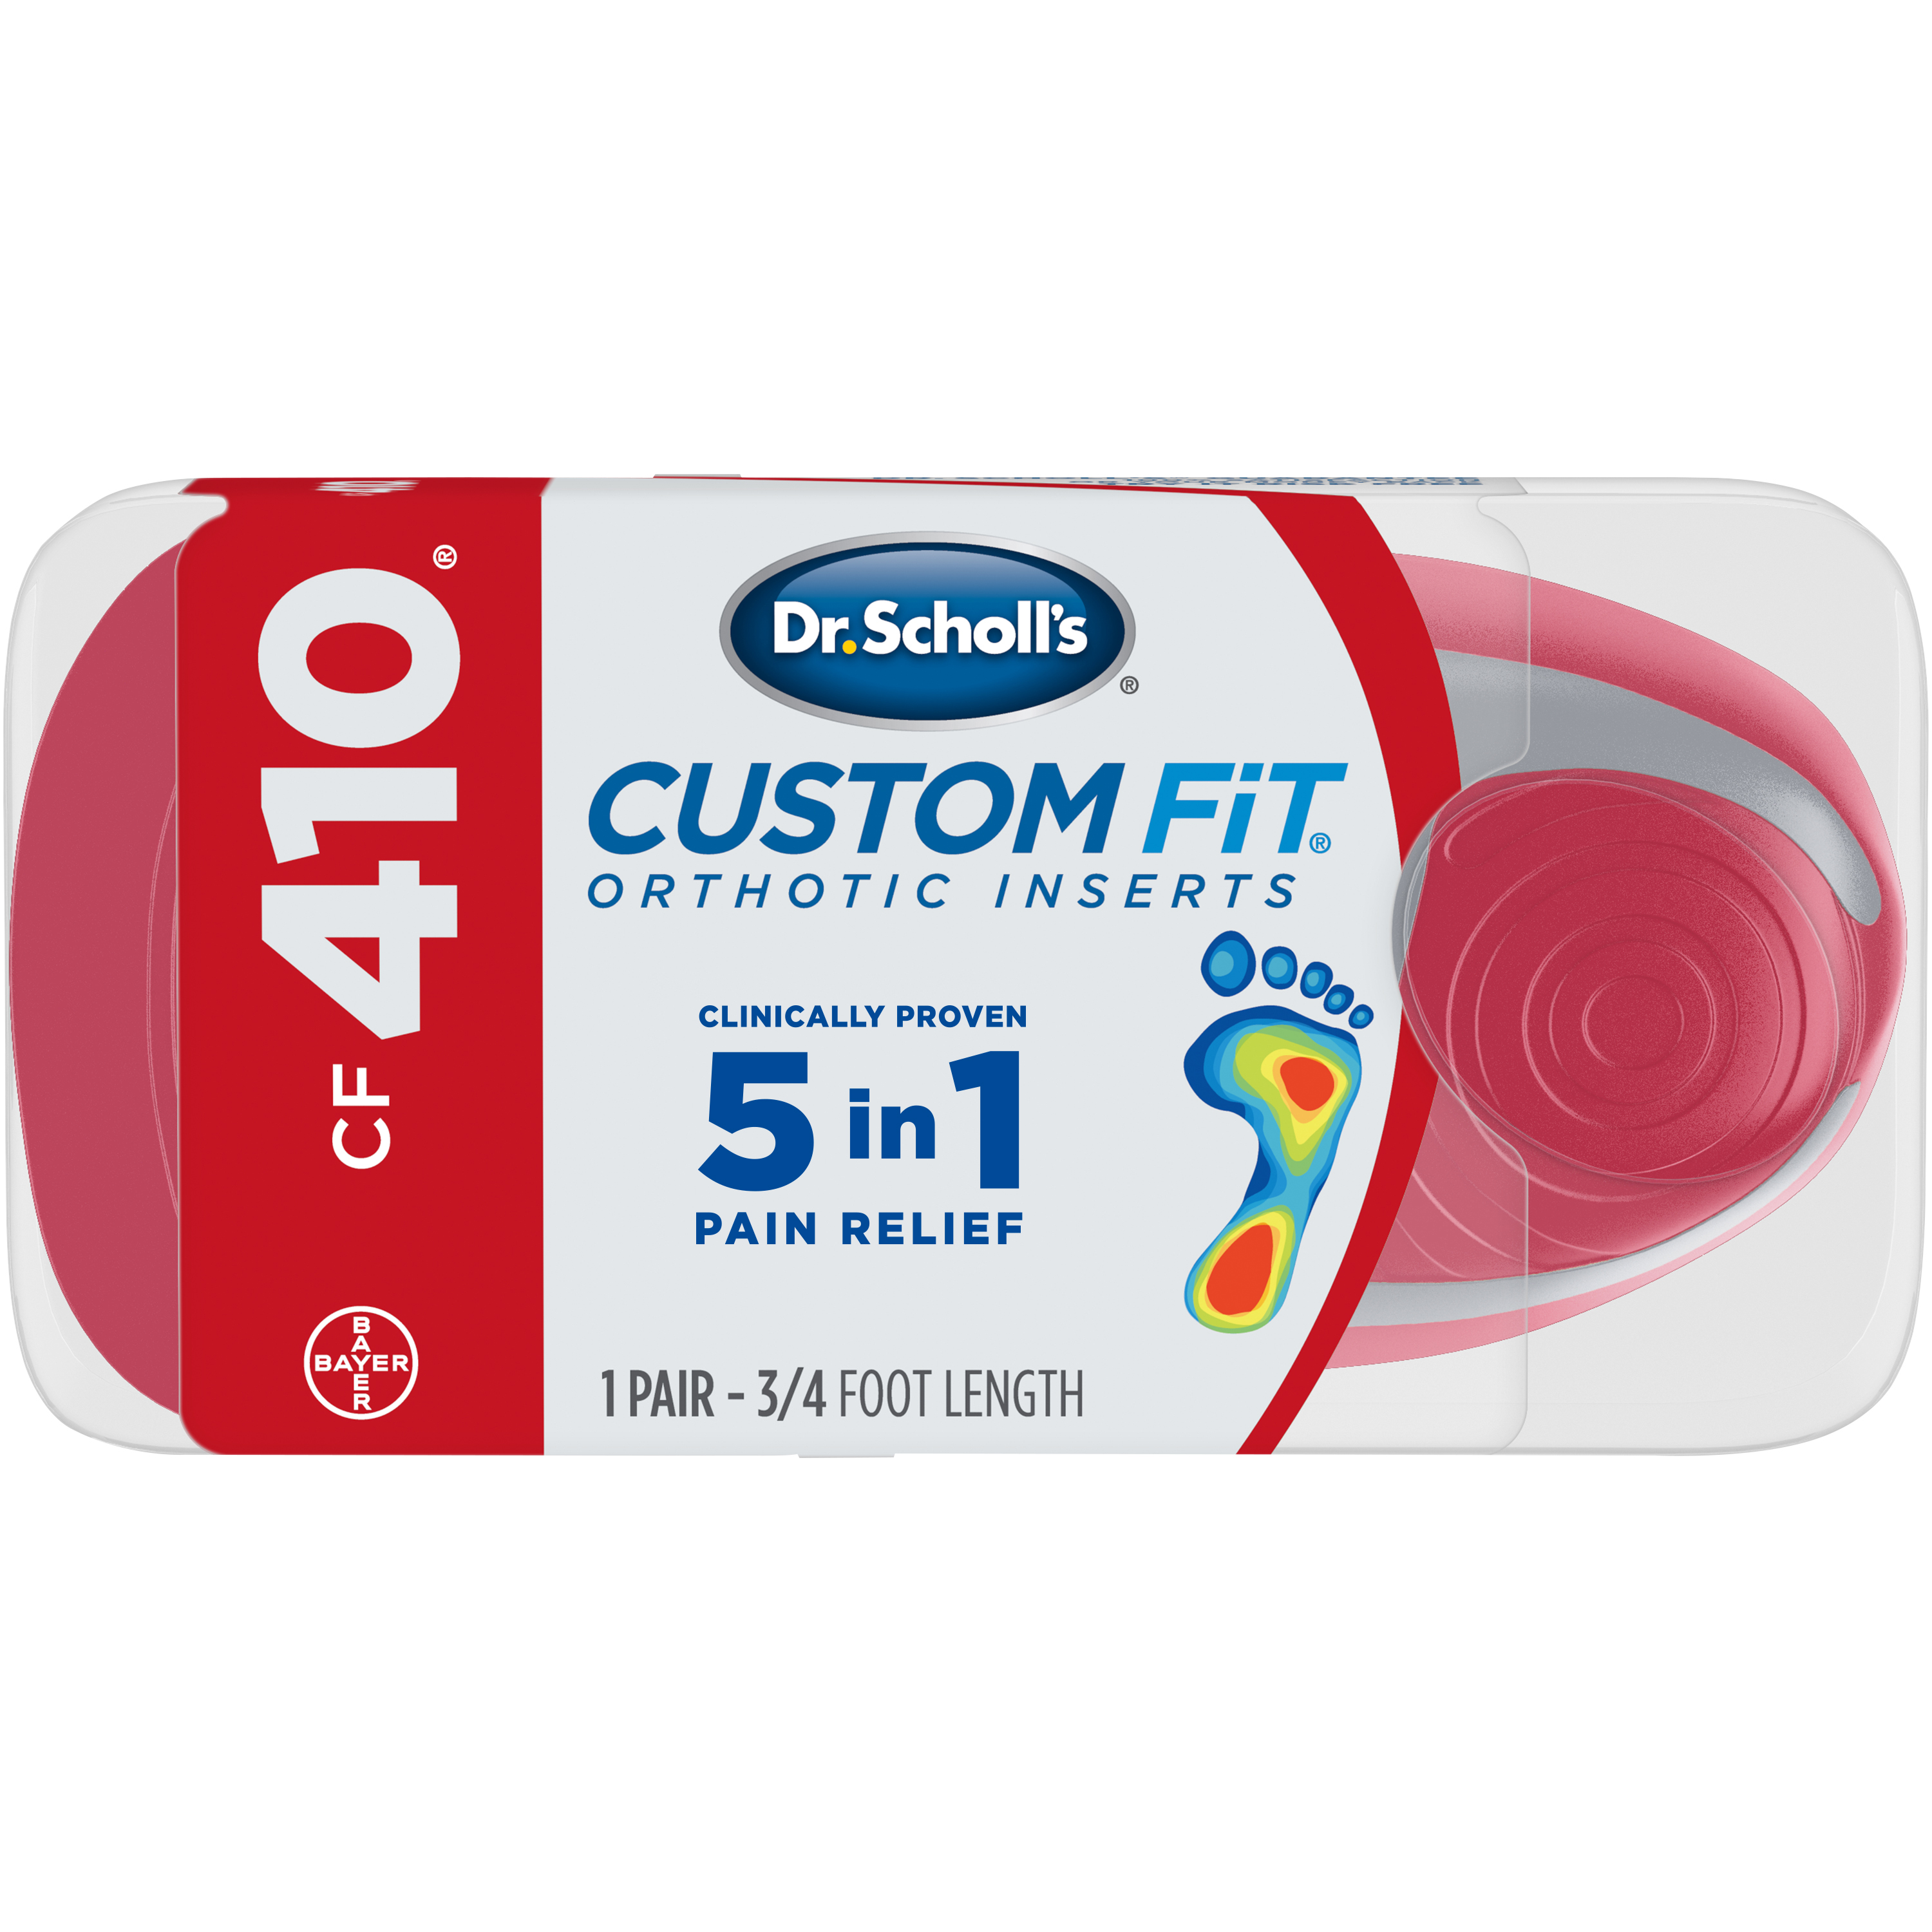 Dr. Scholl's Custom Fit CF410 Orthotic Shoe Inserts for Foot, Knee and Lower Back Relief, 1 Pair - image 1 of 7